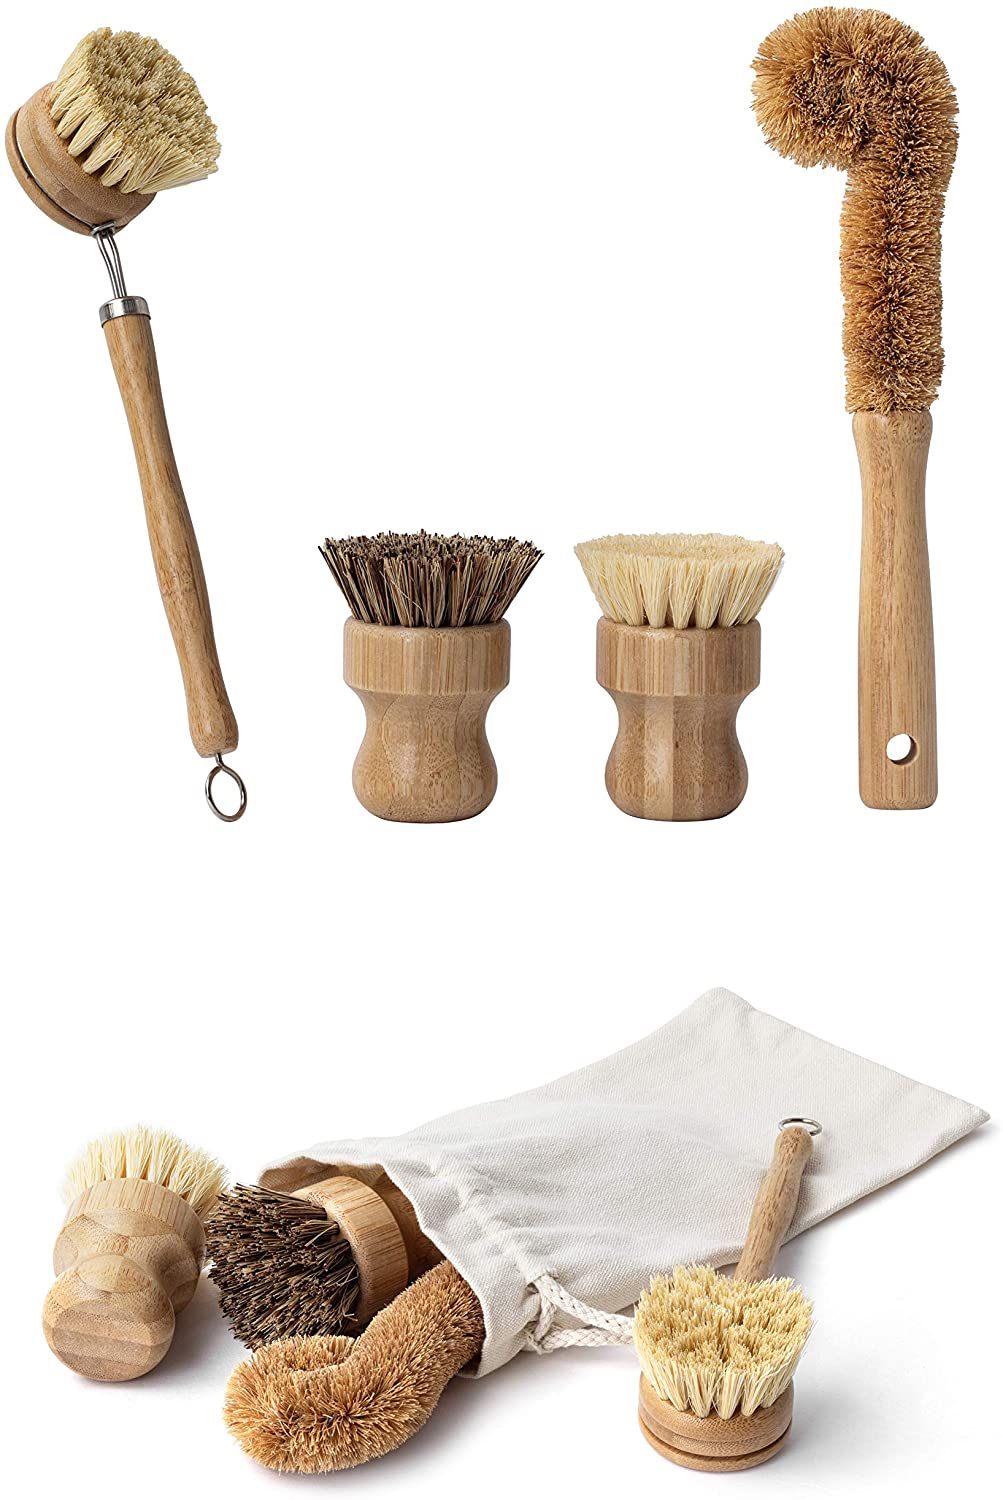 Beyond Gourmet Natural Bristle Vegetable and Dish Brush with Handle